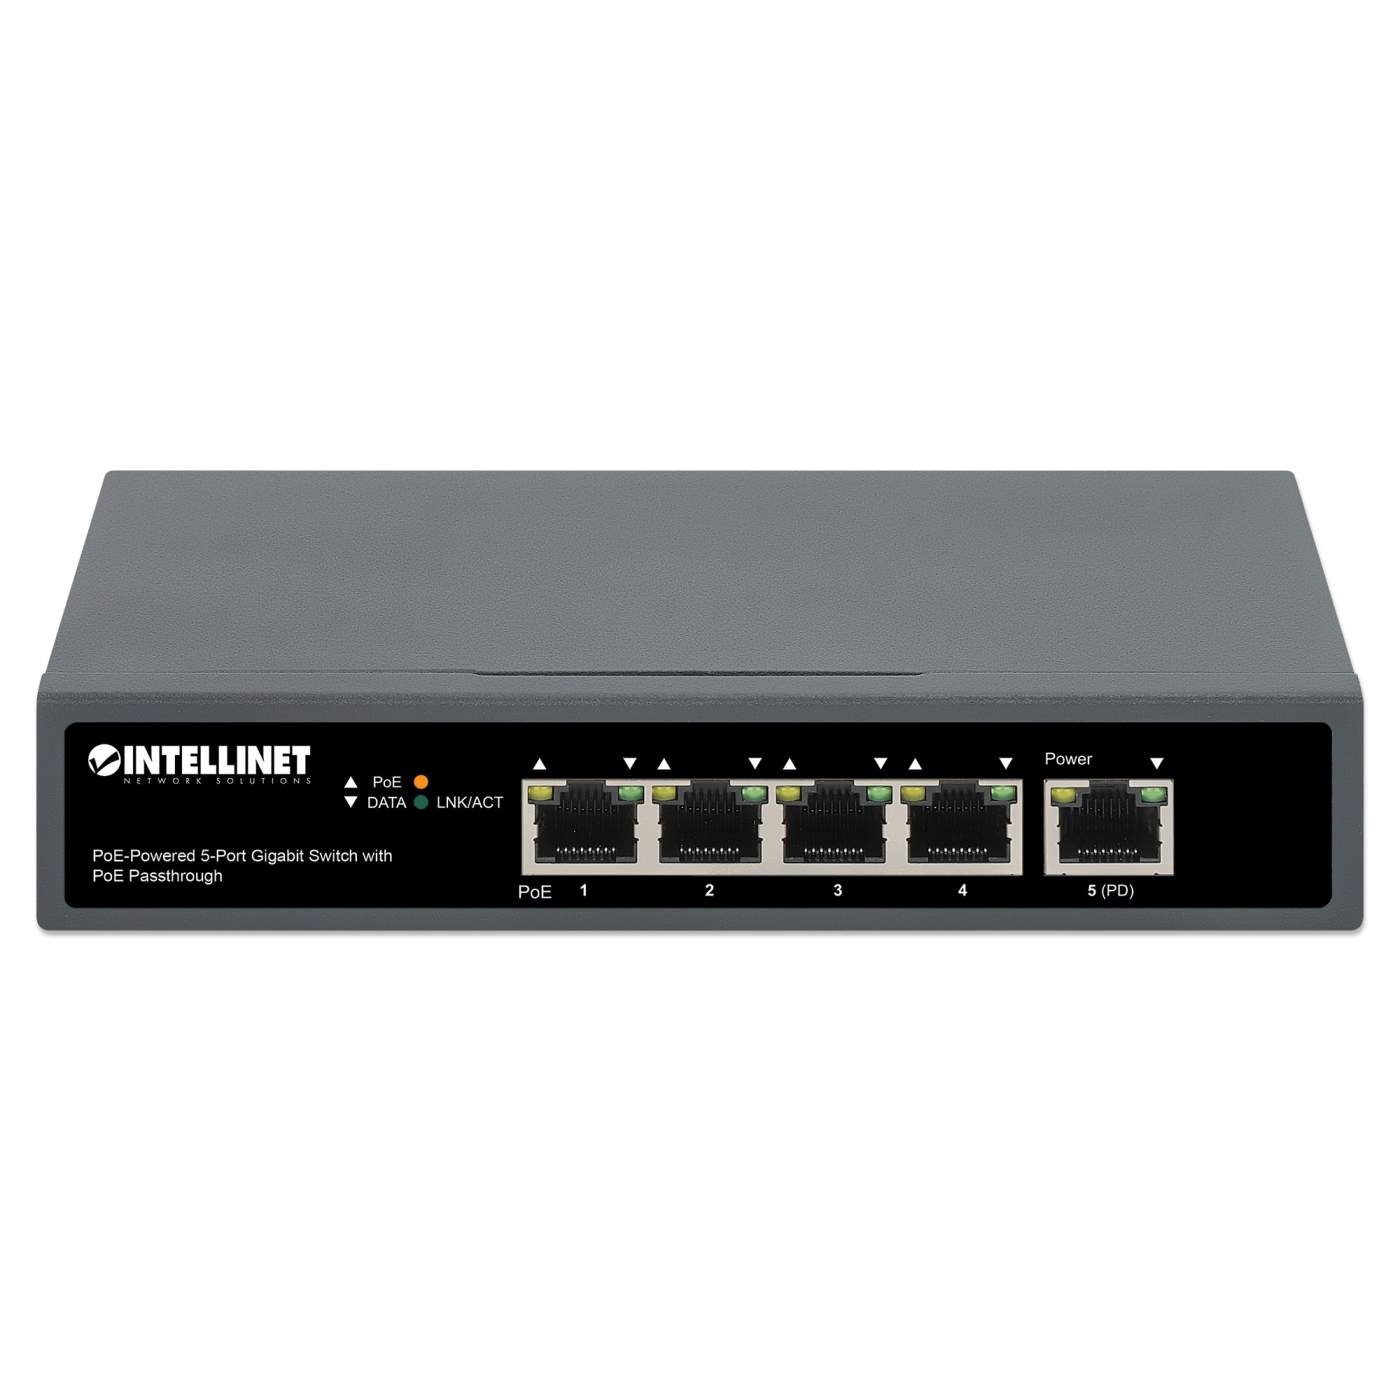 PoE-Powered 5-Port Gigabit Switch with PoE Passthrough Image 4